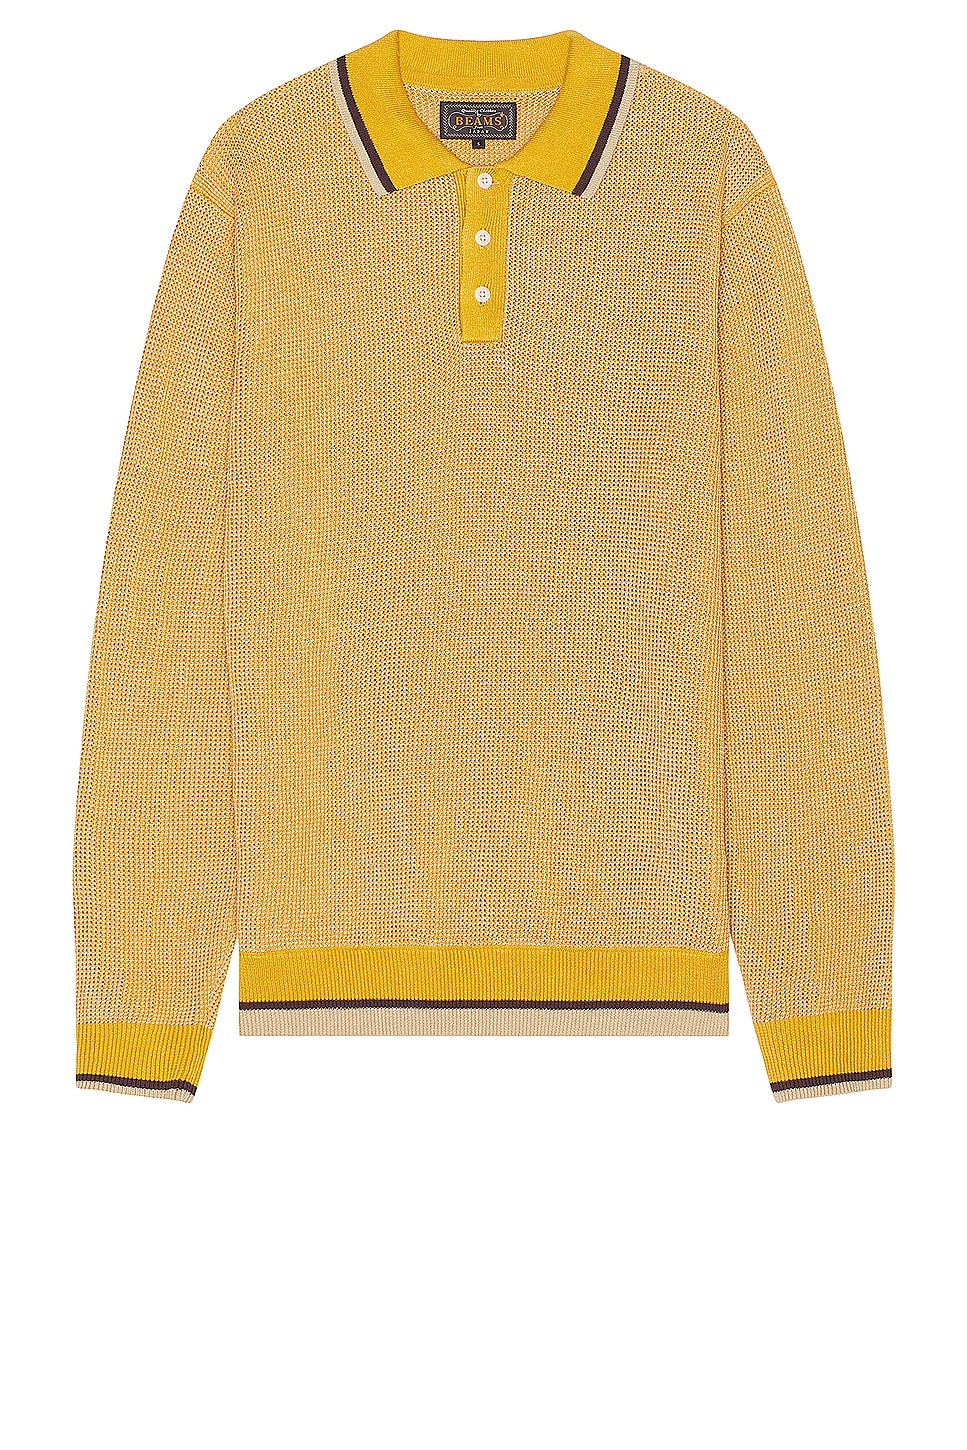 Image 1 of Beams Plus Slab Knit Polo Cotton Linen in Mustard